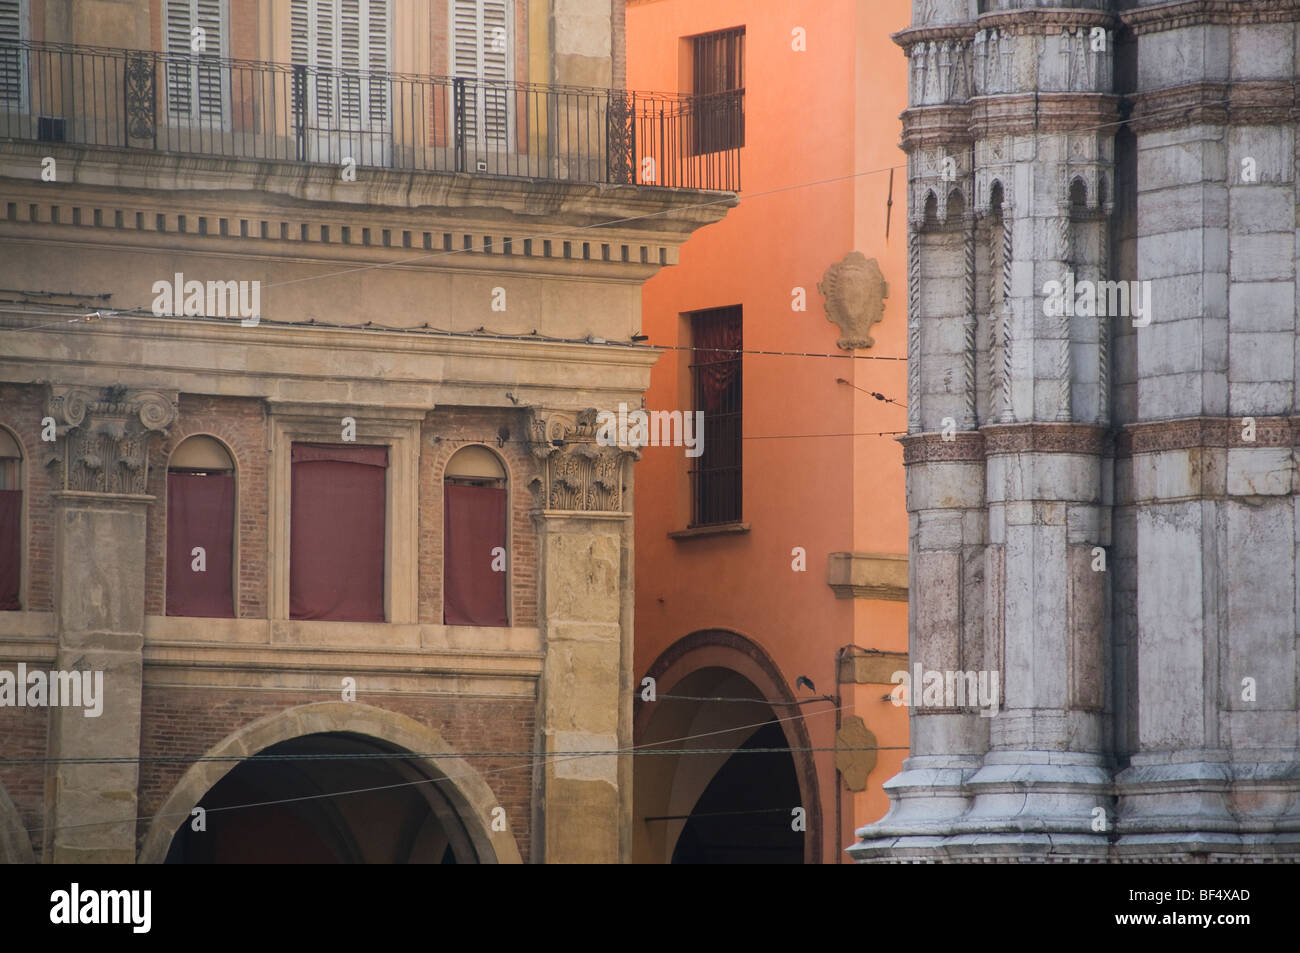 Alleys and walls, Piazza Maggiore, Bologna, Italy Stock Photo